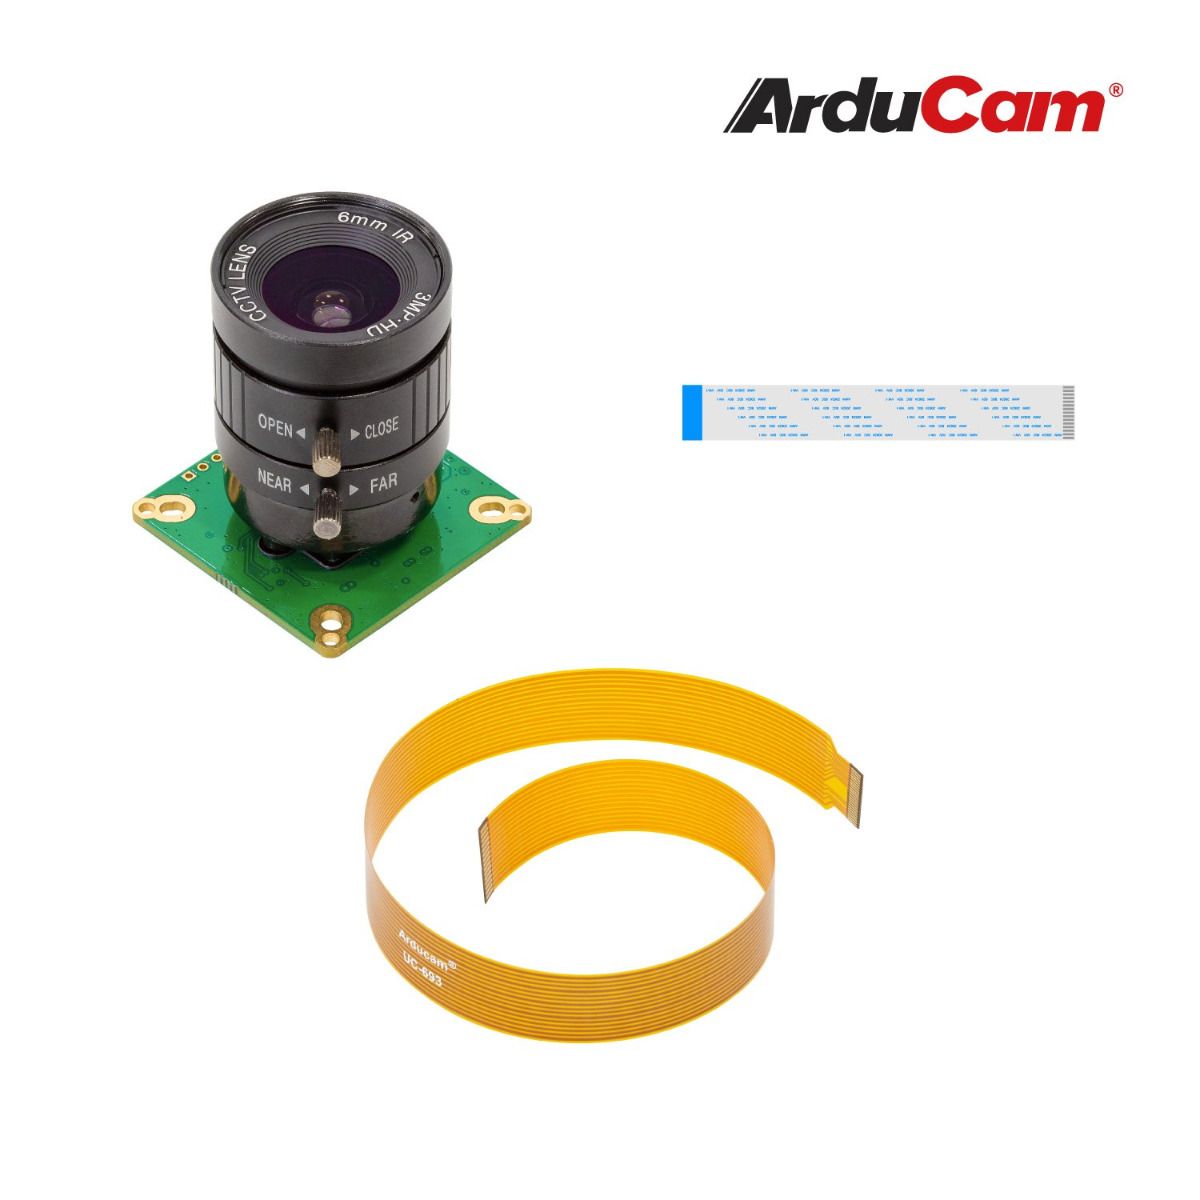 Arducam High Quality Camera, 12.3MP 1/2.3 Inch IMX477 HQ Camera Module with 6mm CS-Mount Lens for Jetson Nano，Xavier NX